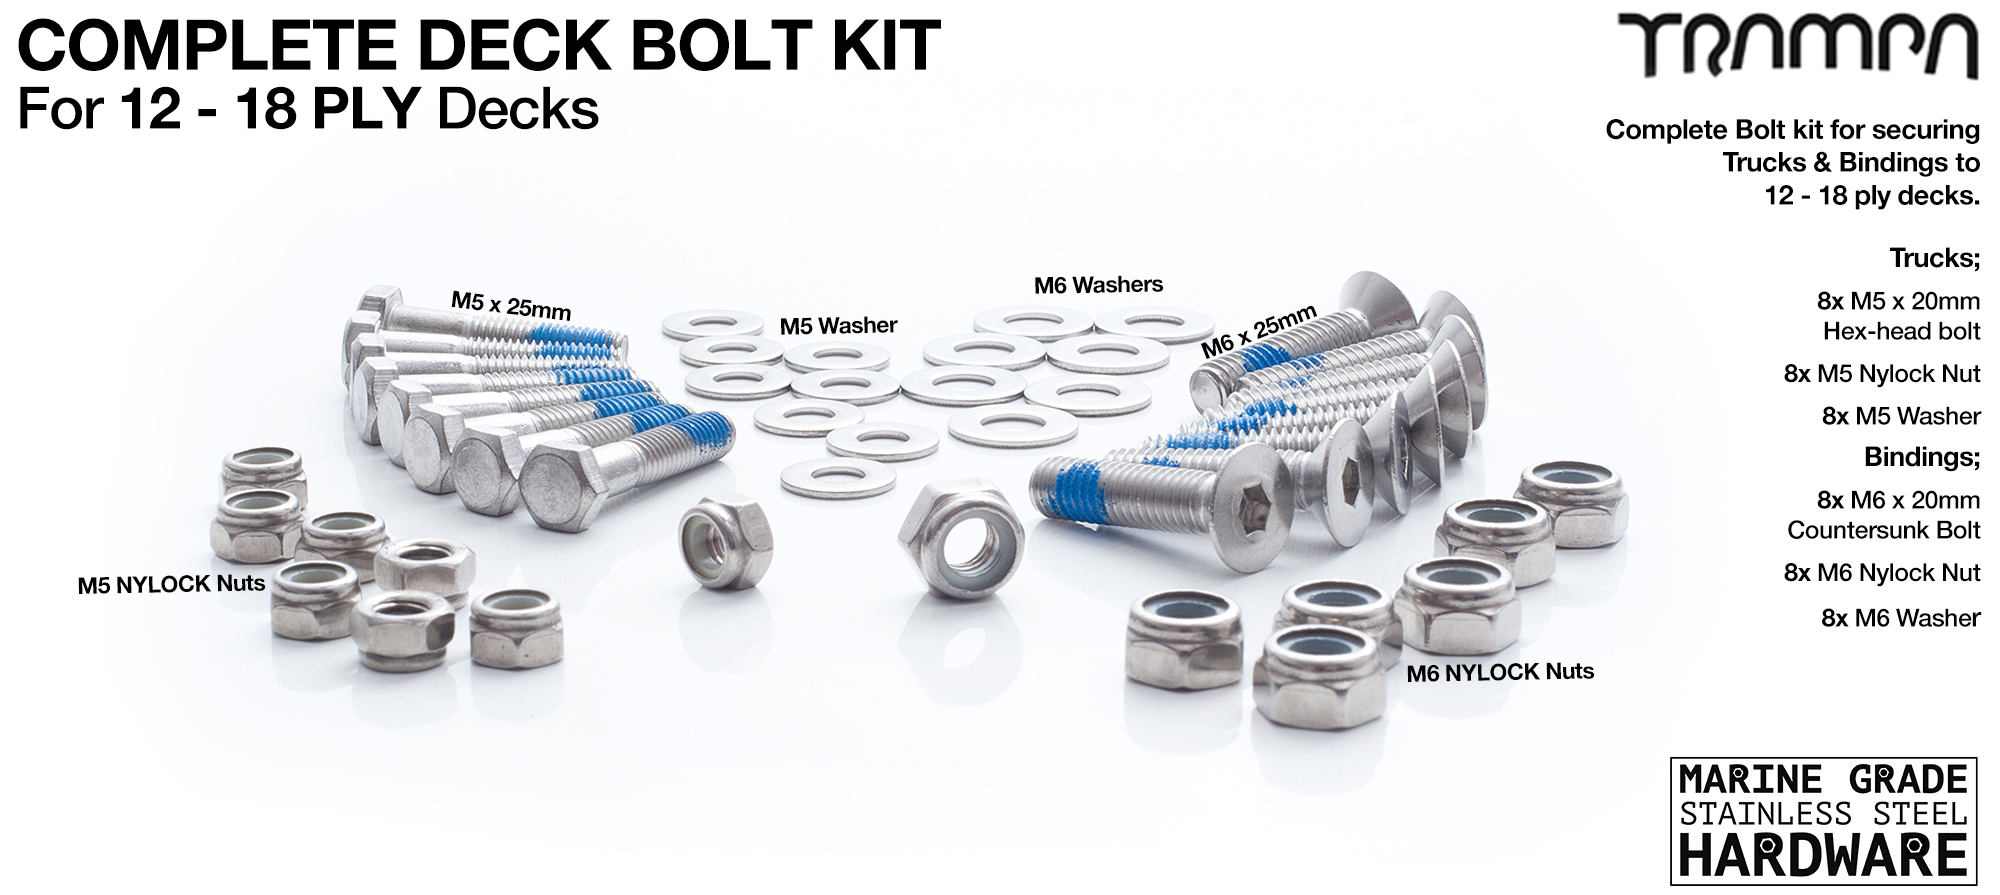 Marine Grade Stainless Steel Complete ATB Deck Bolt Kit NO Wings - 12-18ply